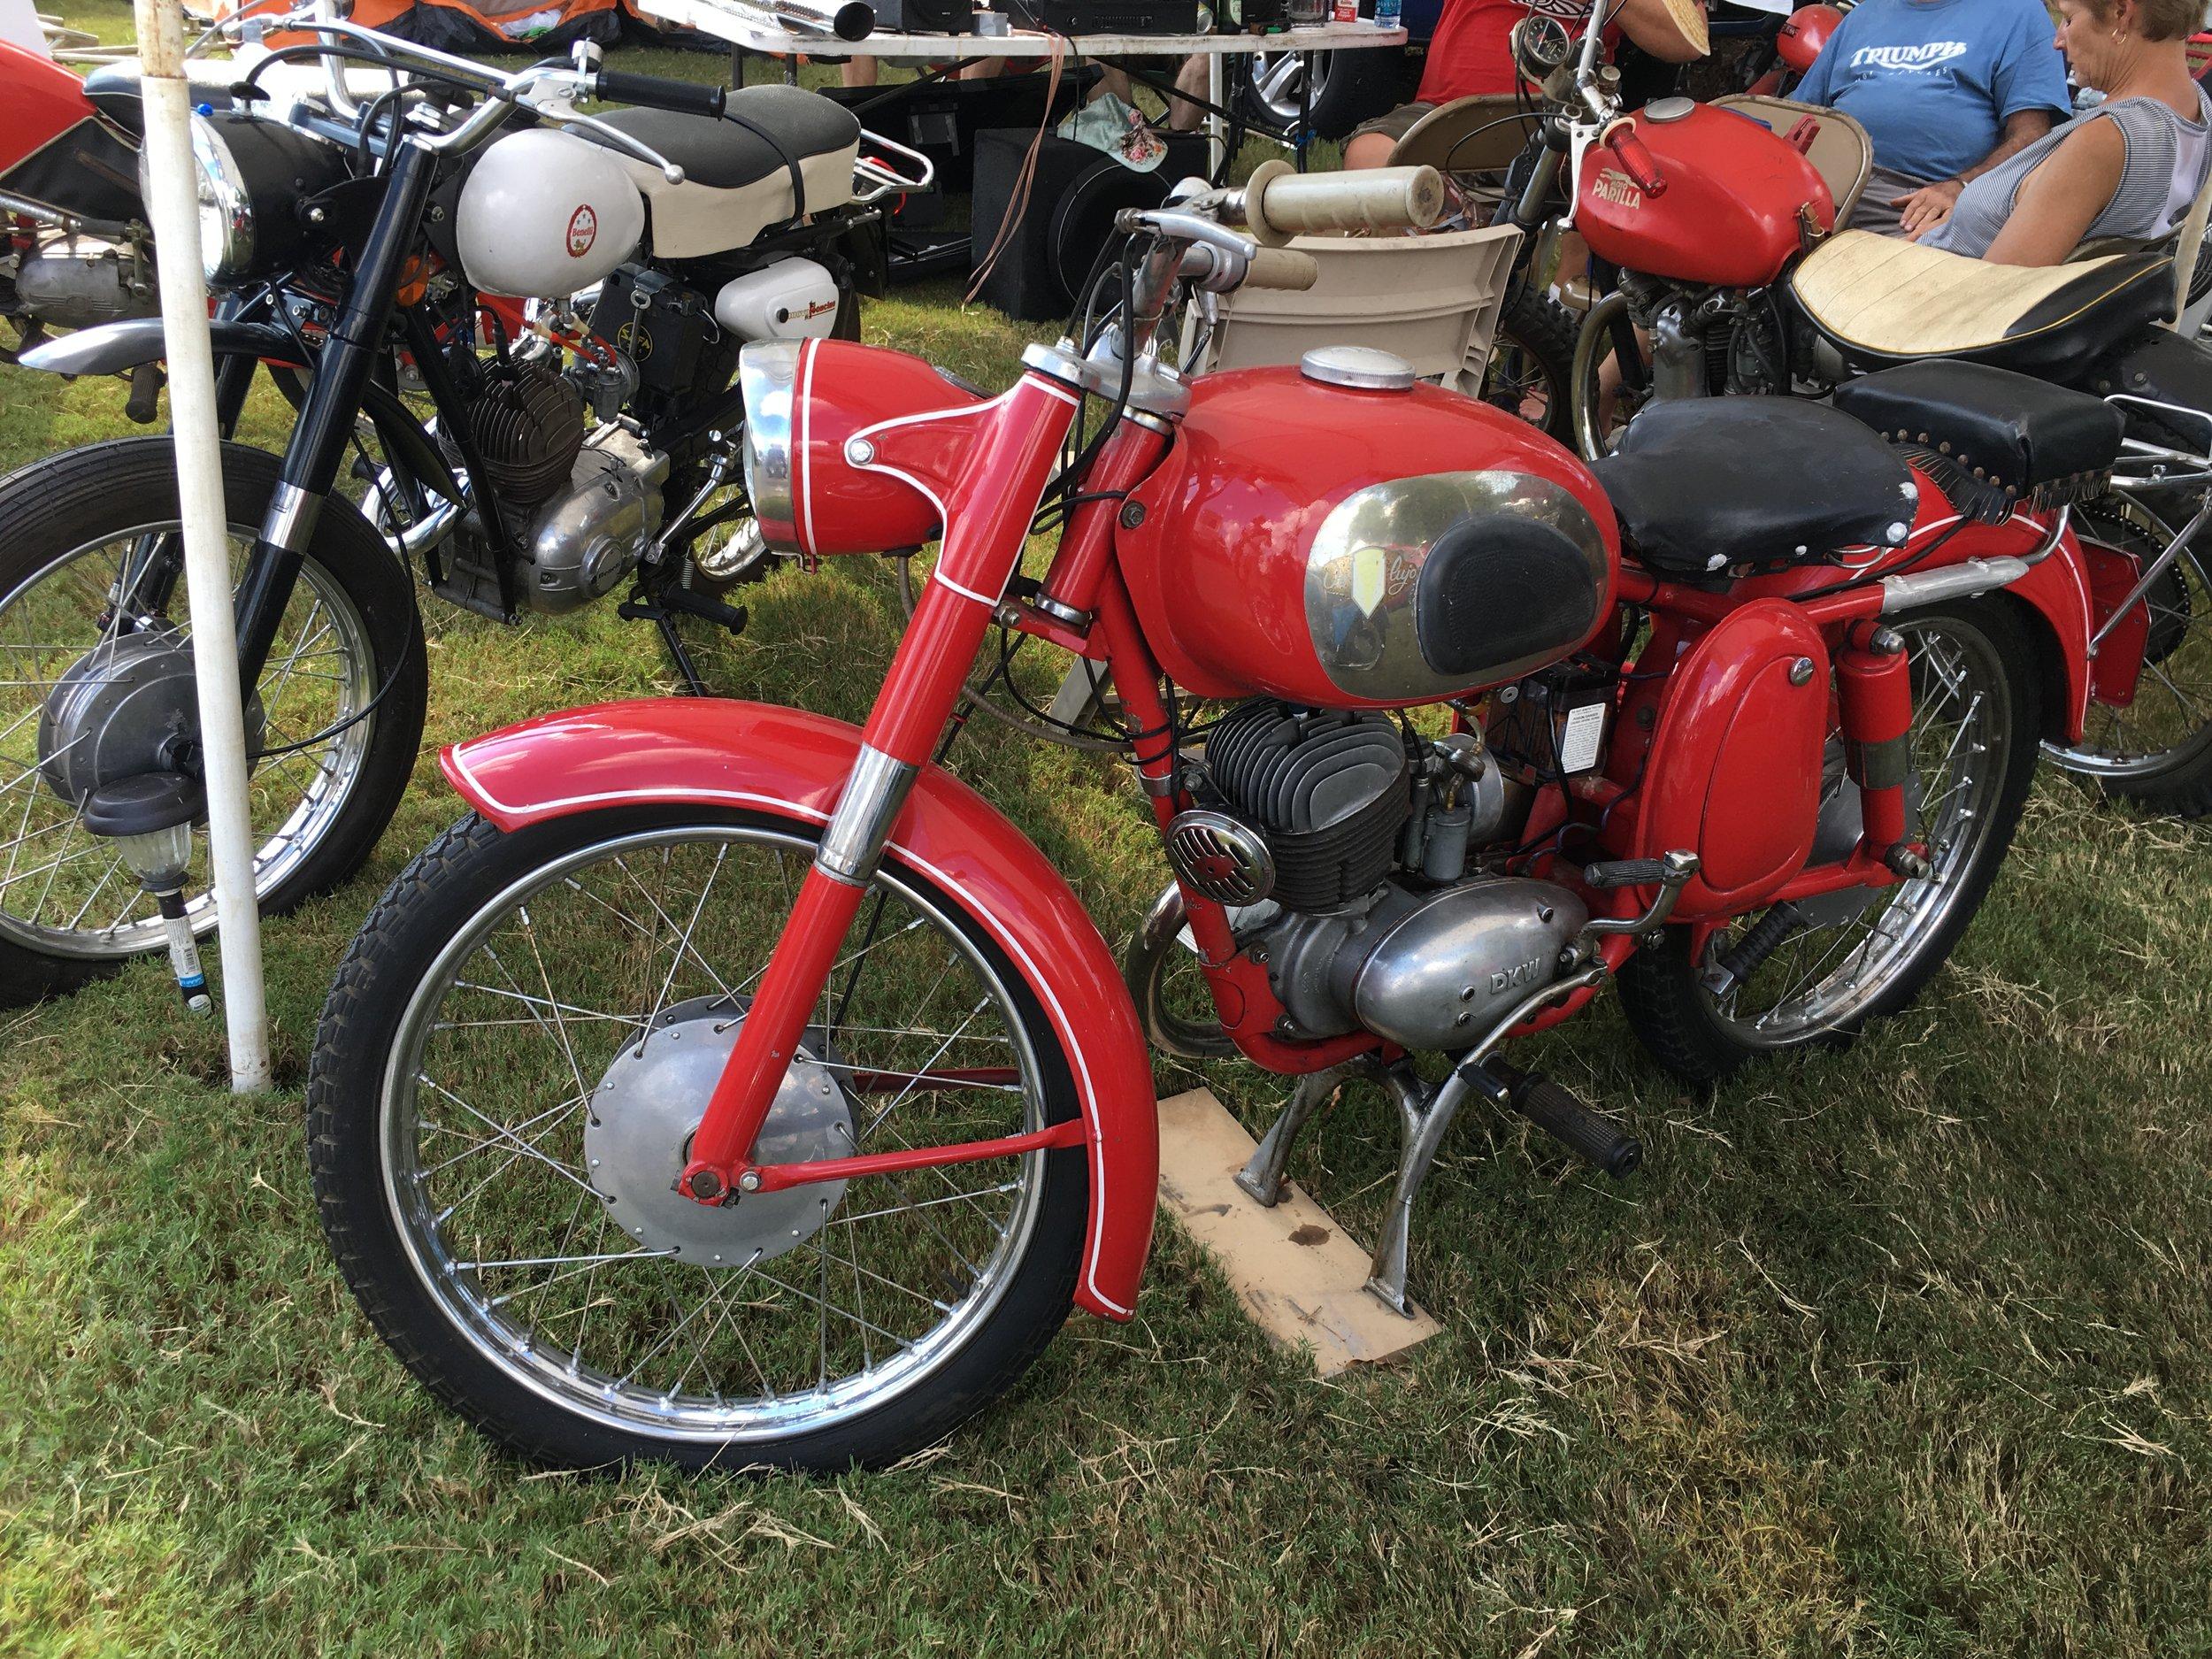 DKW with a pillion seat way off the rear….